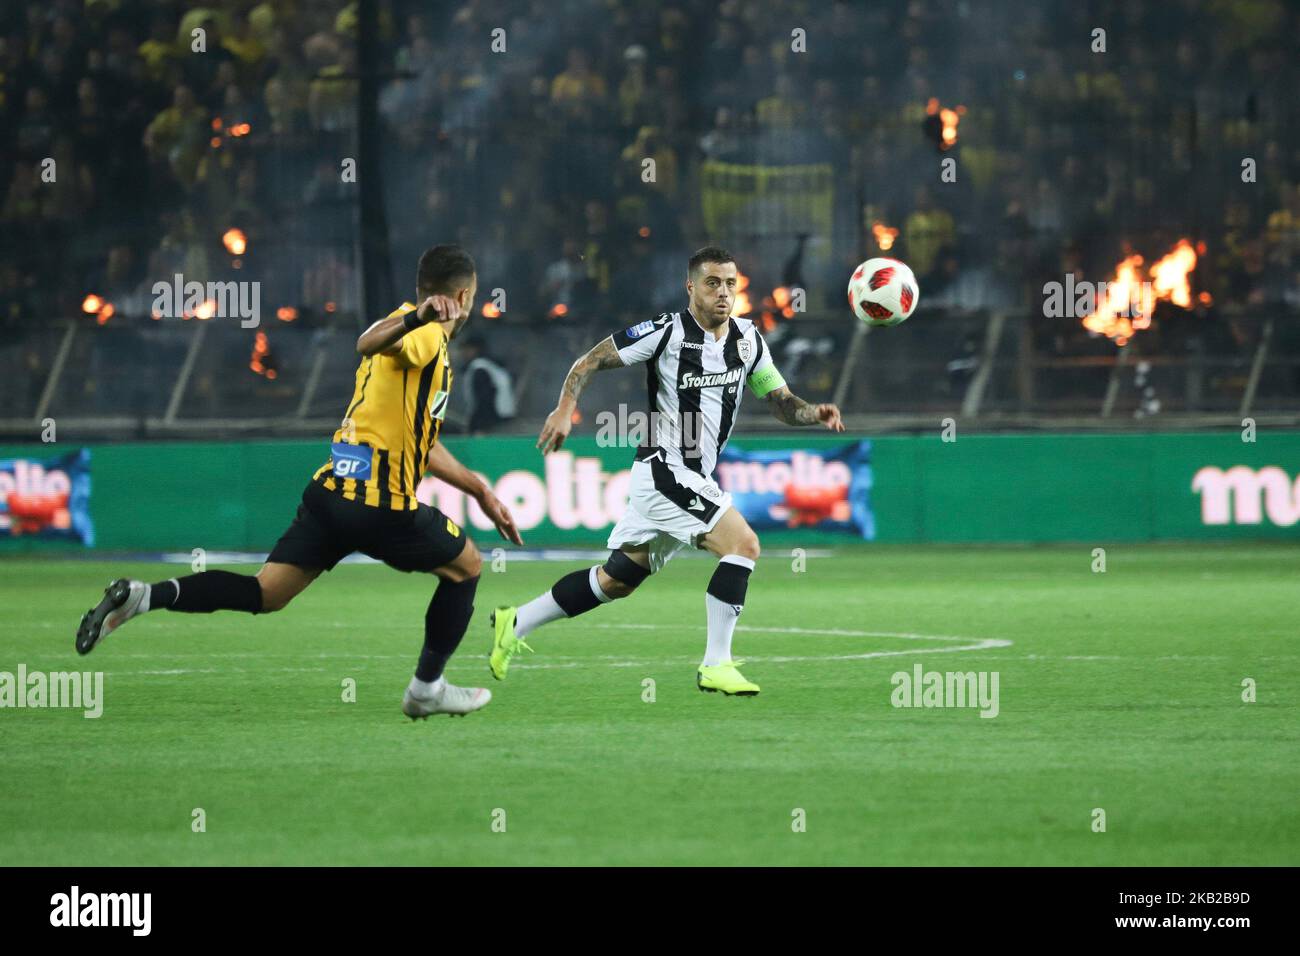 Vieirinha or officially Adelino André Vieira de Freitas (PAOK) during FC Aris and FC Paok game for the Superleague Greece, the first category in Thessaloniki, Greece, on 21 October 2018. The game was held in Kleanthis Vikelides Stadium or Charilaou stadium, the home of FC Aris. First scored Aris in the 2' min with Mateo Garcia and then Aleksandar Prijovic for PAOK hit a penalty in the 36' and then in 84'. After this win FC PAOK kept its 1st position in the Greek Championship. Paok won 2-1. (Photo by Nicolas Economou/NurPhoto) Stock Photo